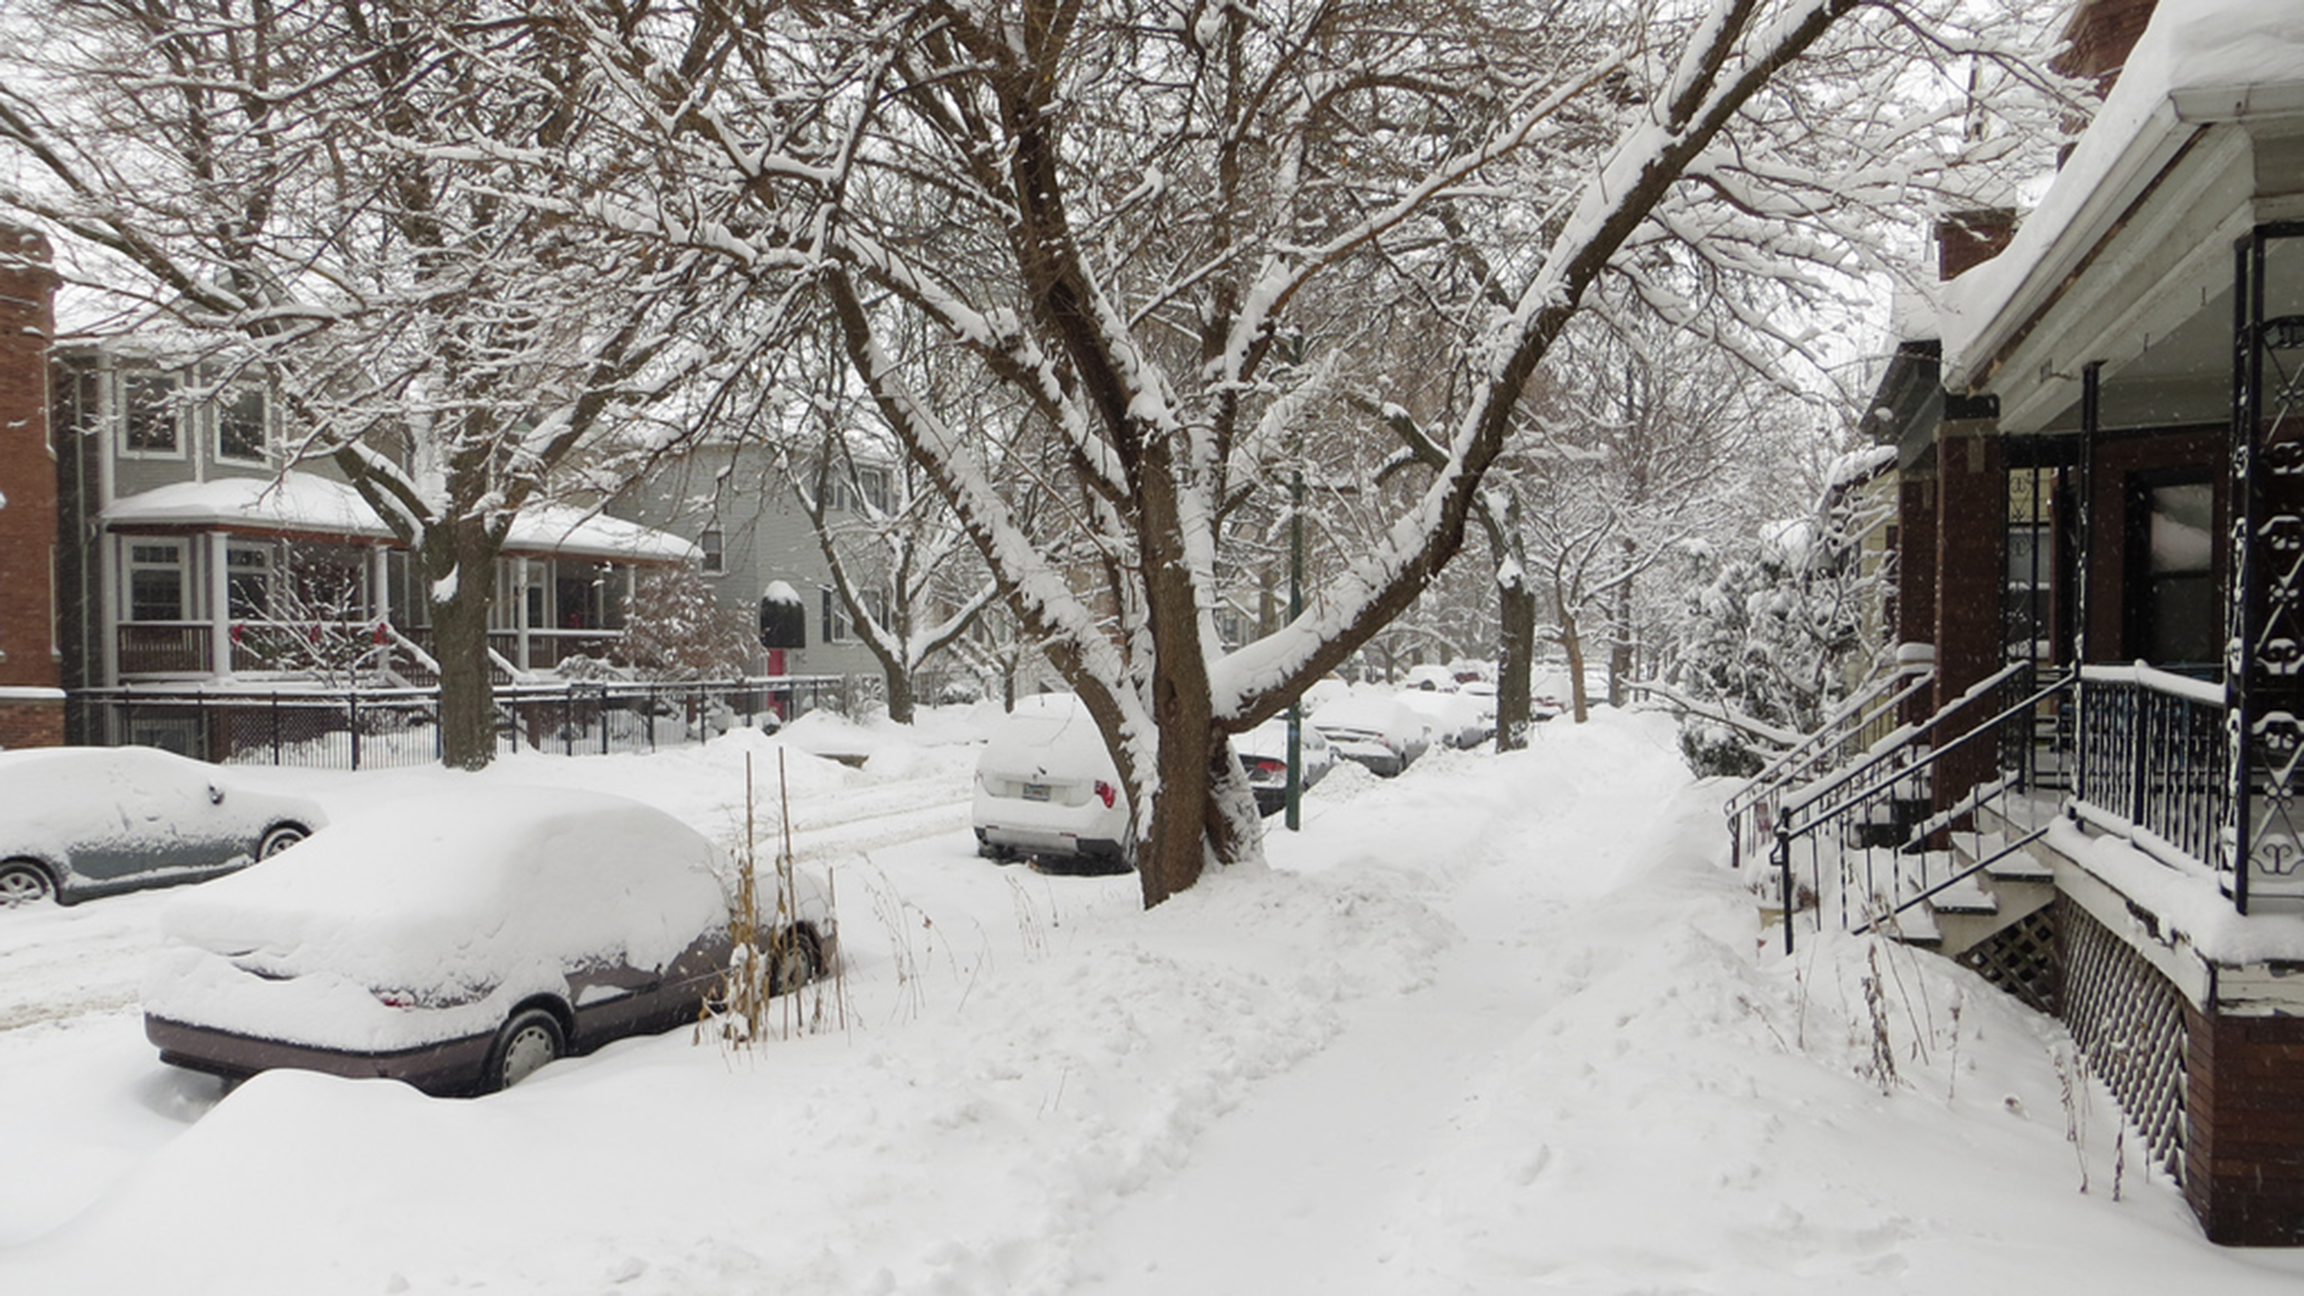 Snow blankets cars and everything else in its way on a Chicago street in January 2014. (Maggie Not Margaret / Flickr)